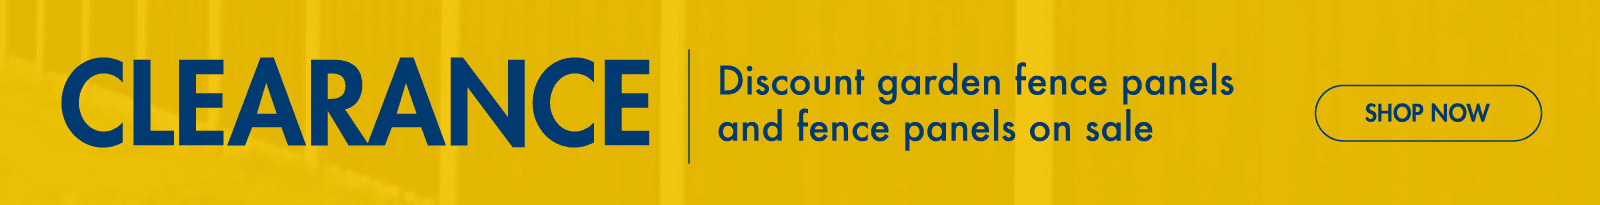 Clearance - Discount garden fence panels and fence panels on sale